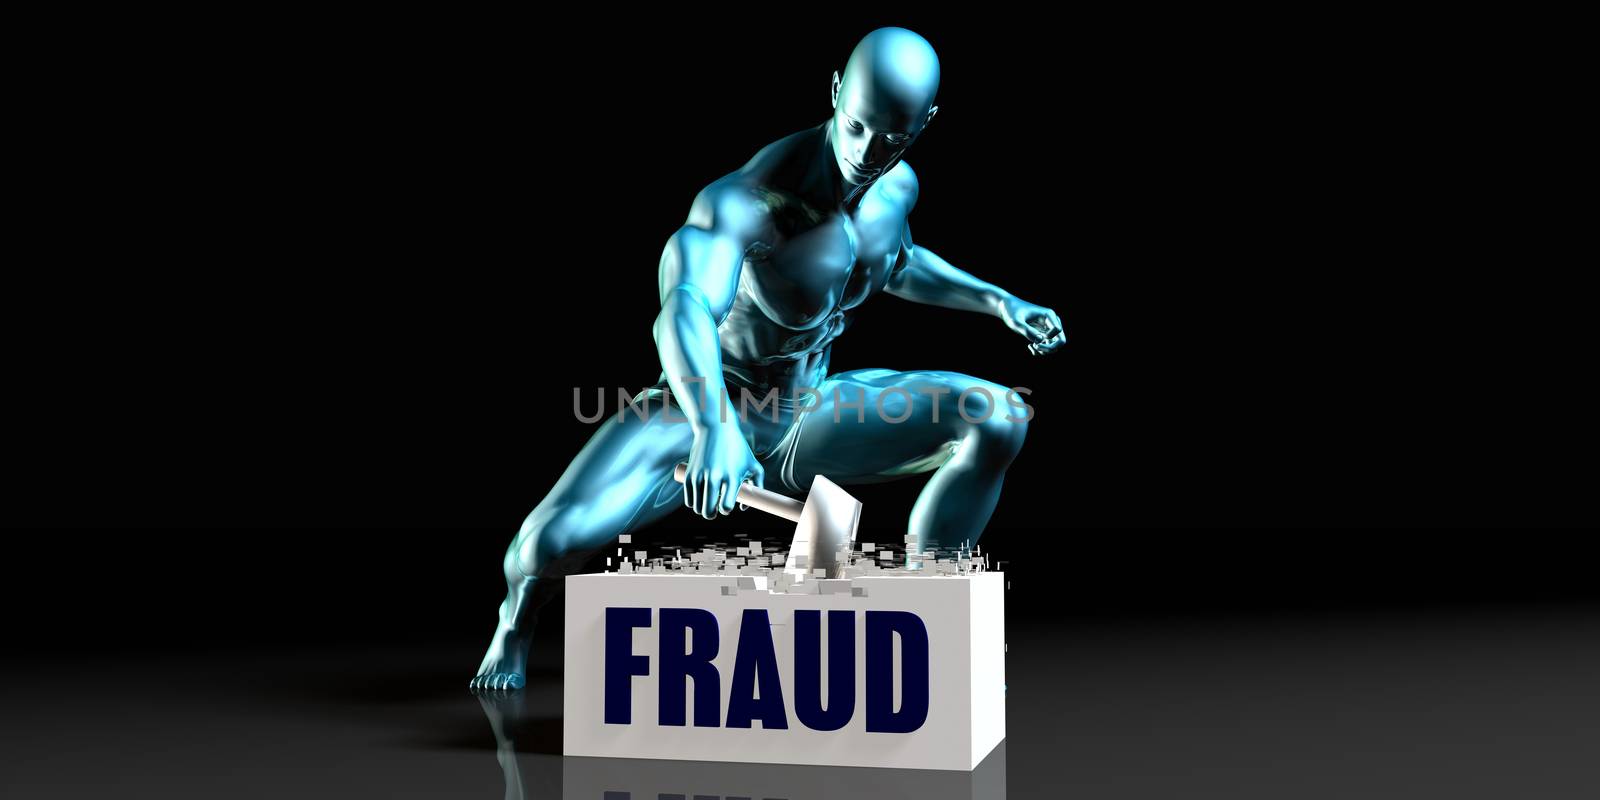 Get Rid of Fraud and Remove the Problem